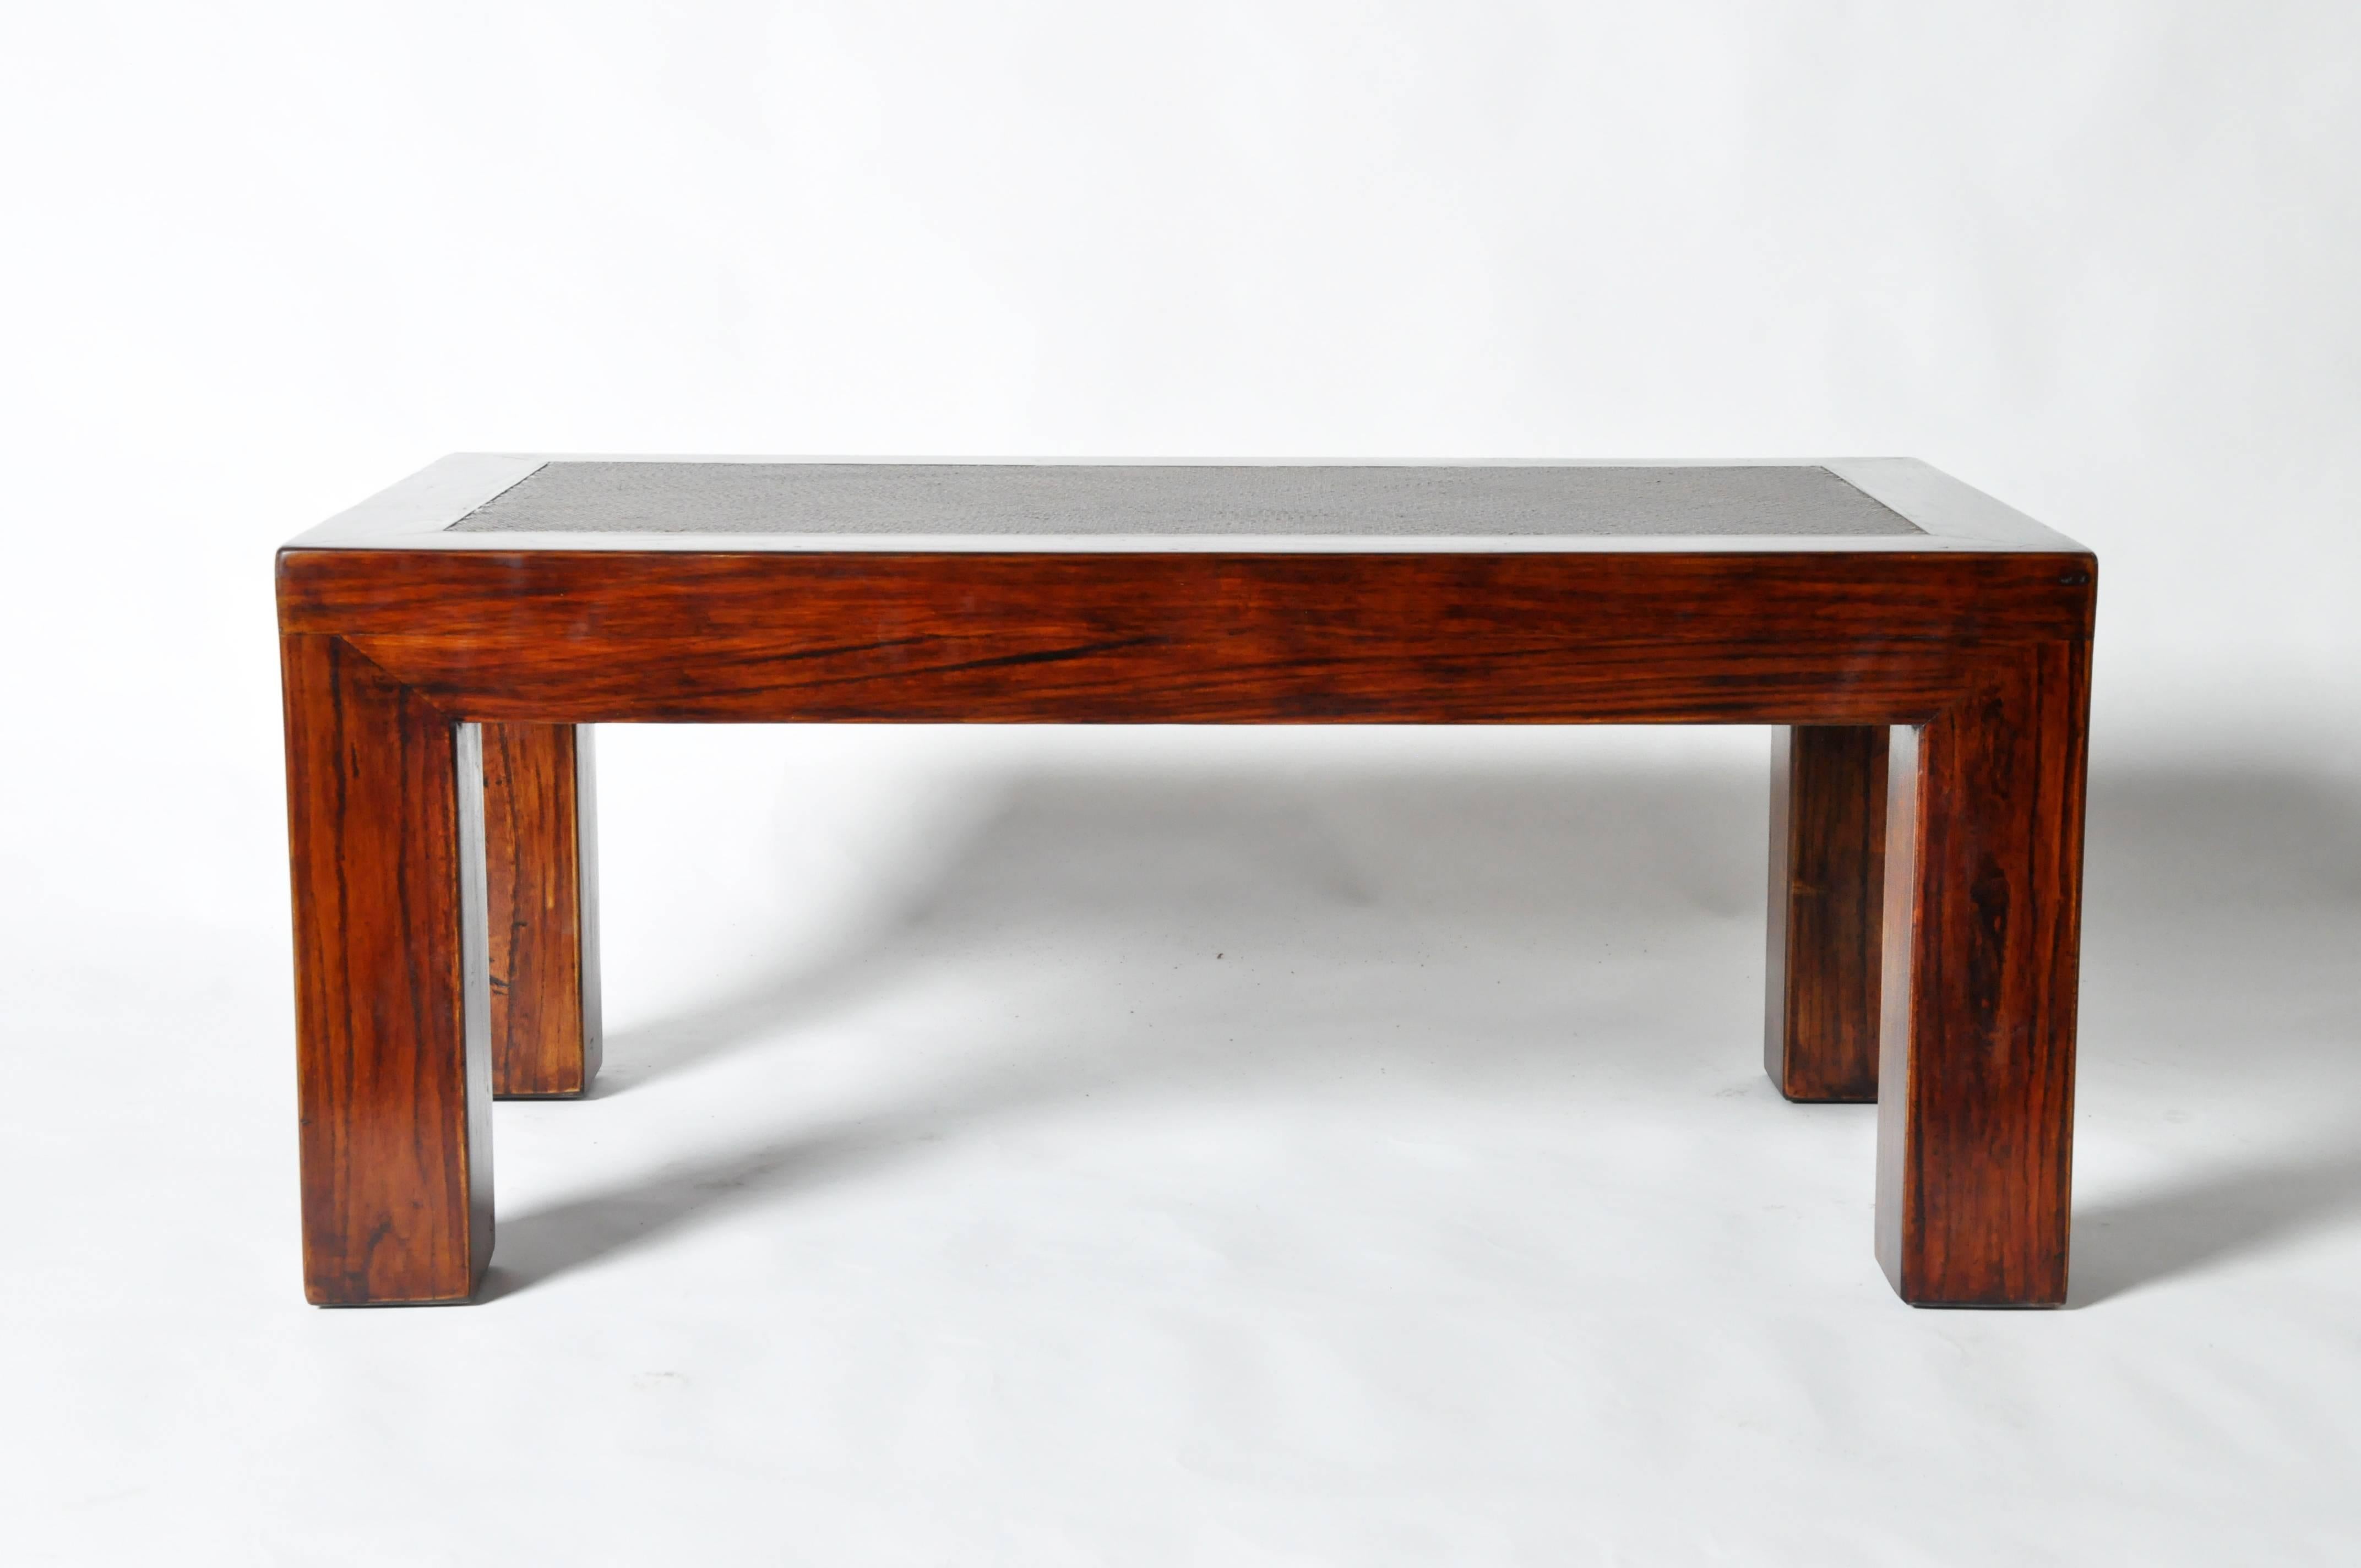 This Chinese low table is made from elmwood and has been fully restored.